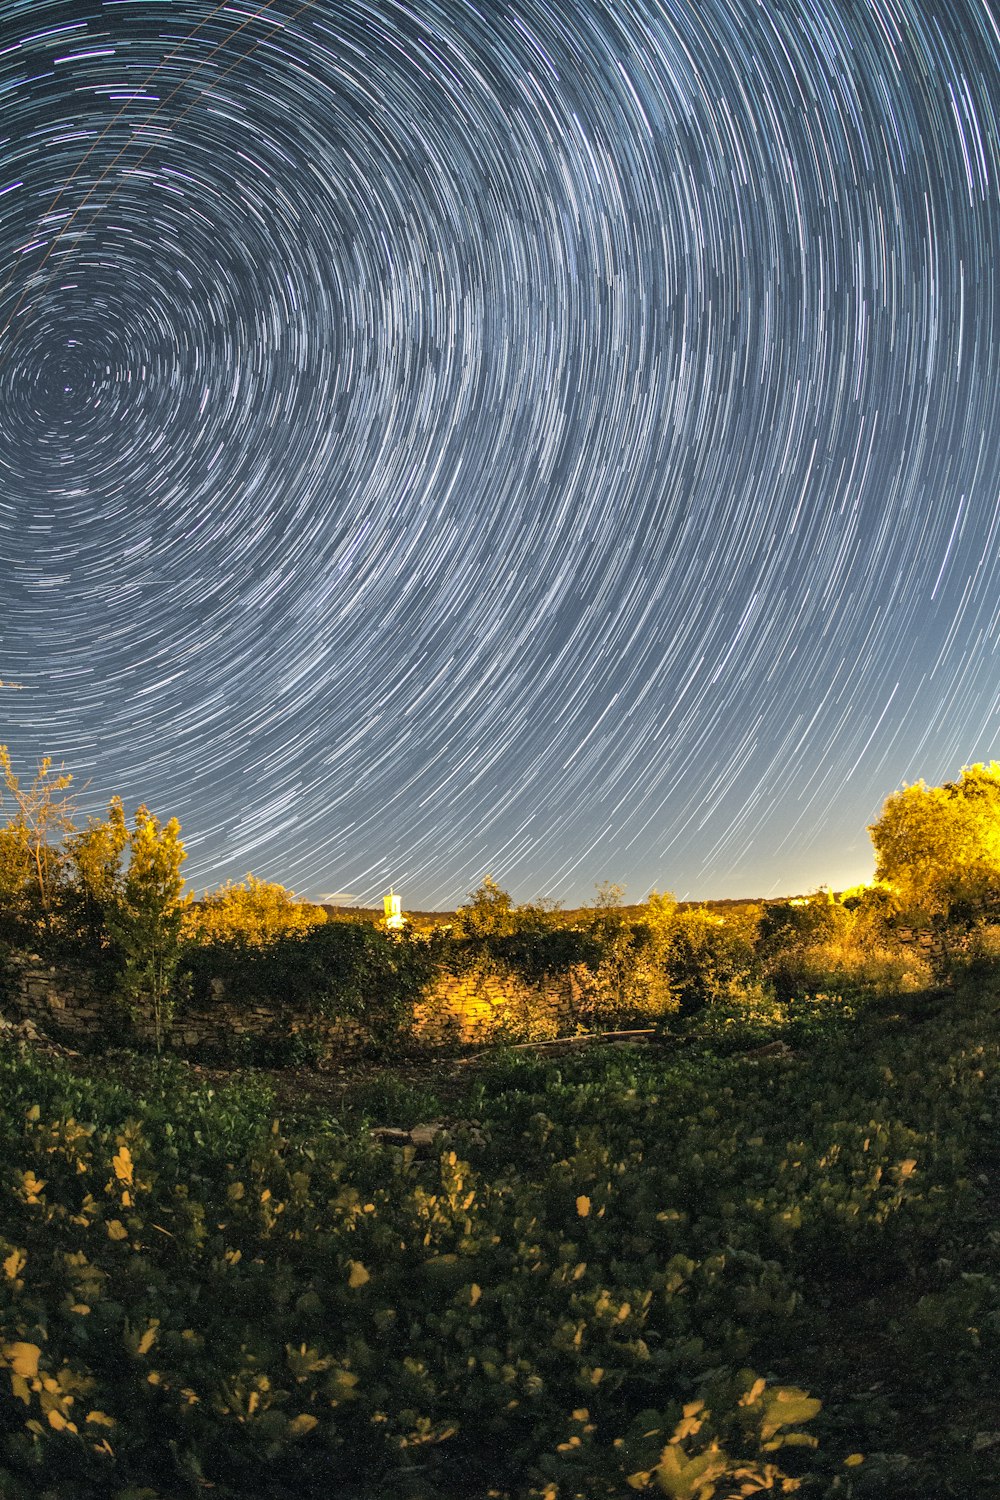 a star trail is seen in the sky above a field